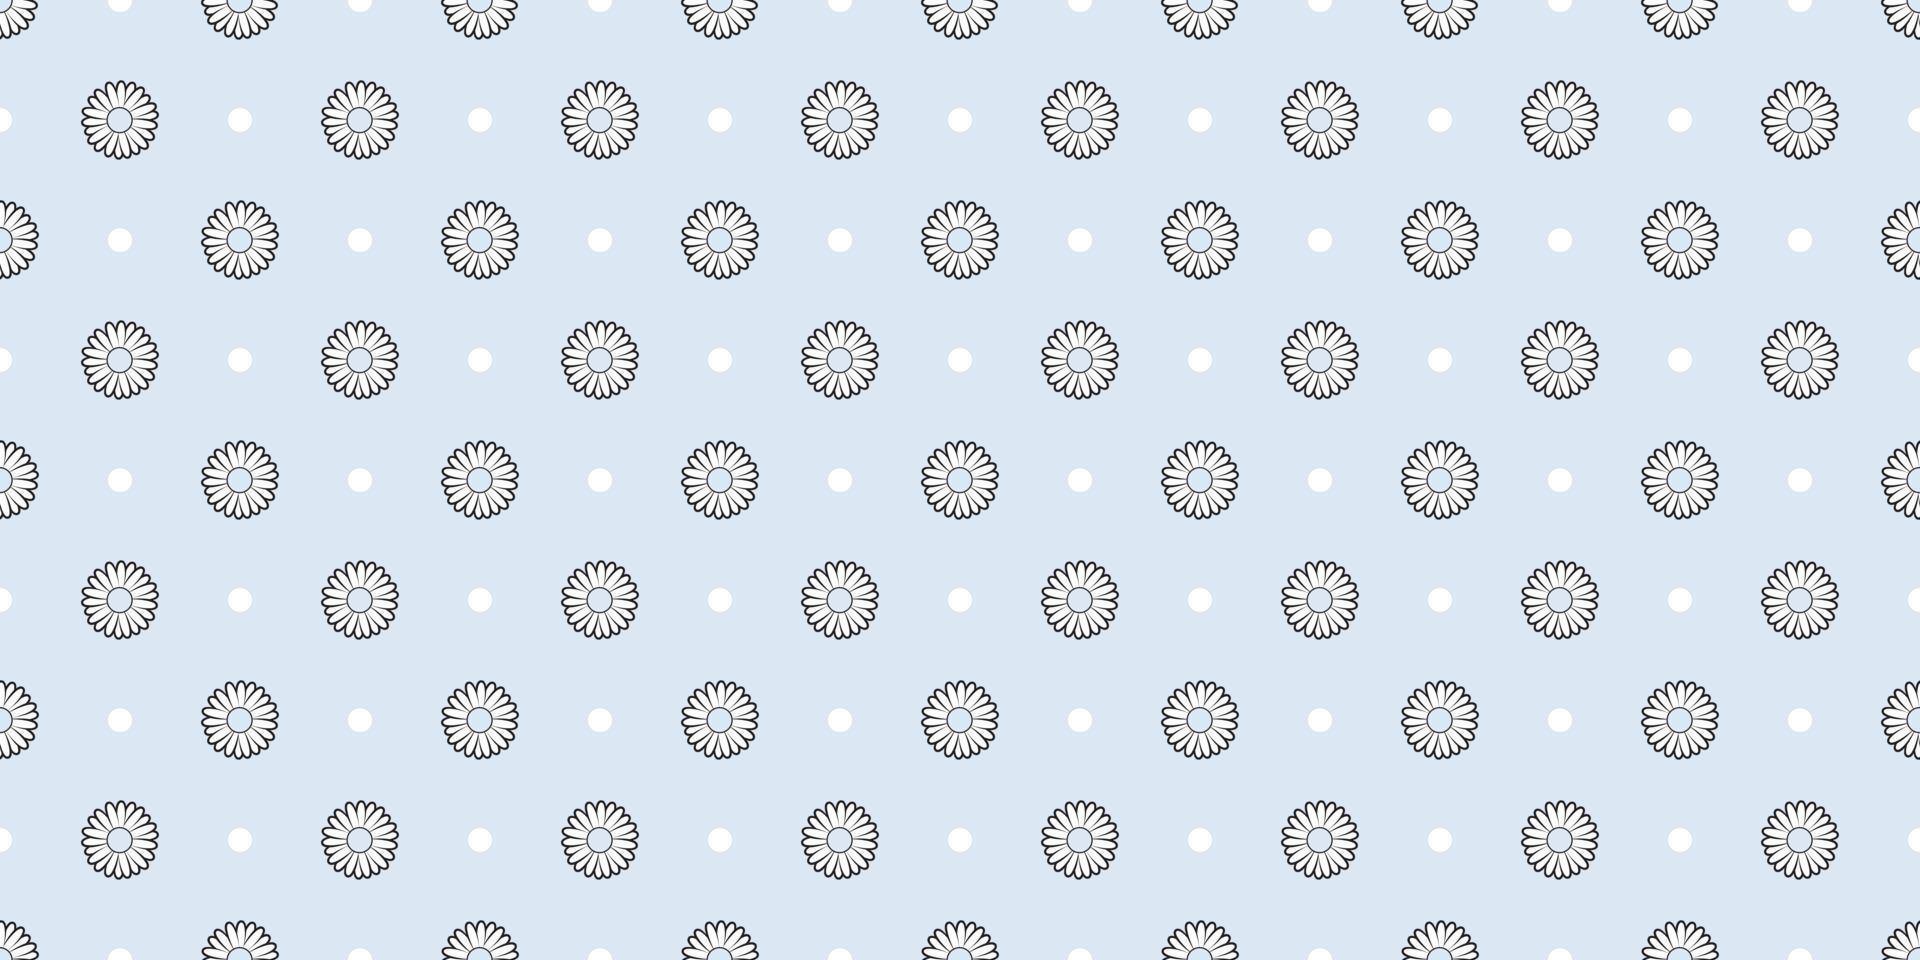 Light blue daisy pattern with dots pattern vector background